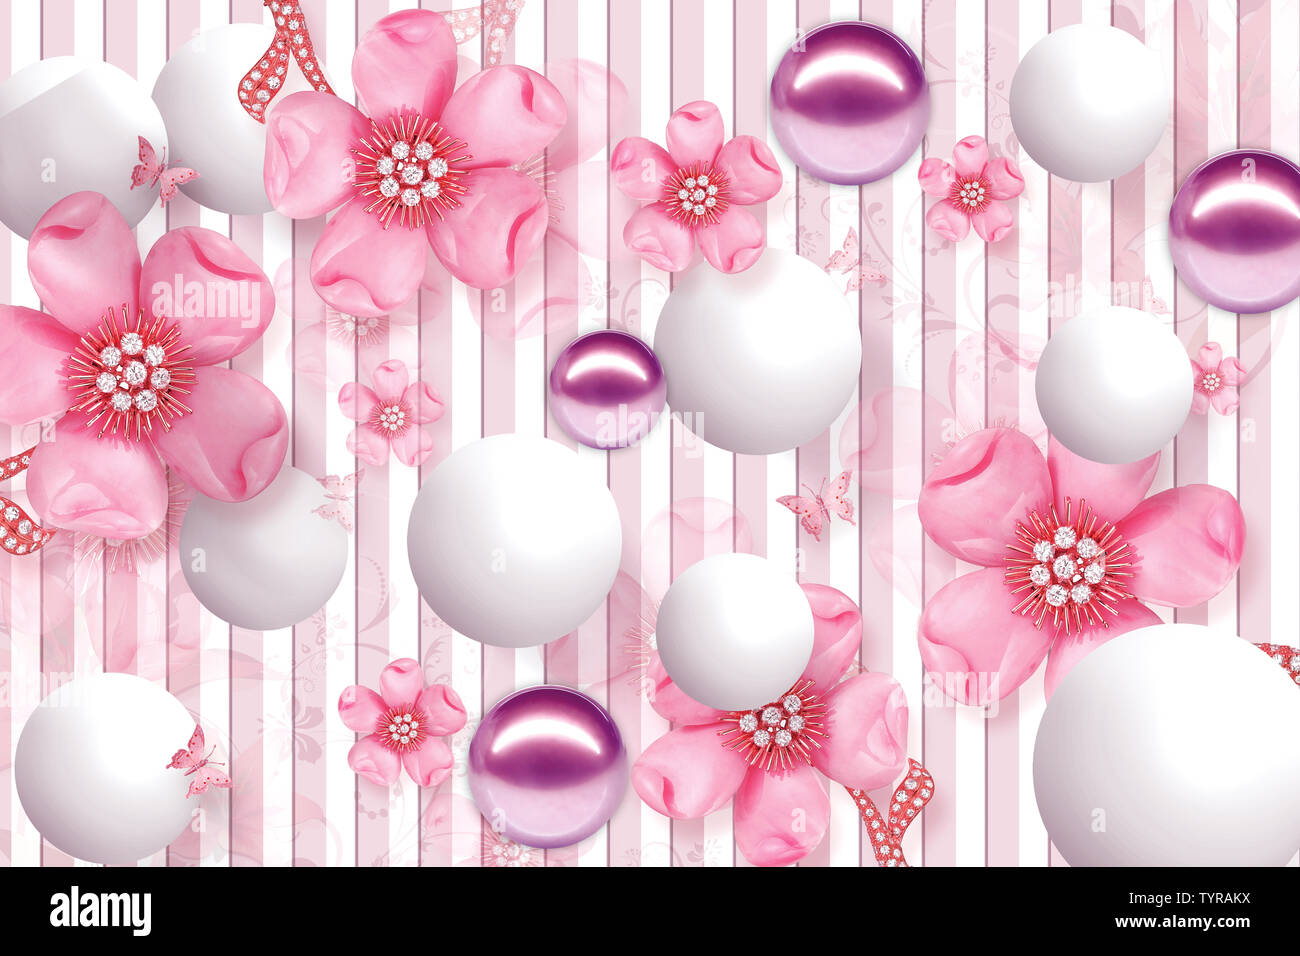 3d Wallpaper Design With Floral And Geometric Objects Gold Ball Images, Photos, Reviews